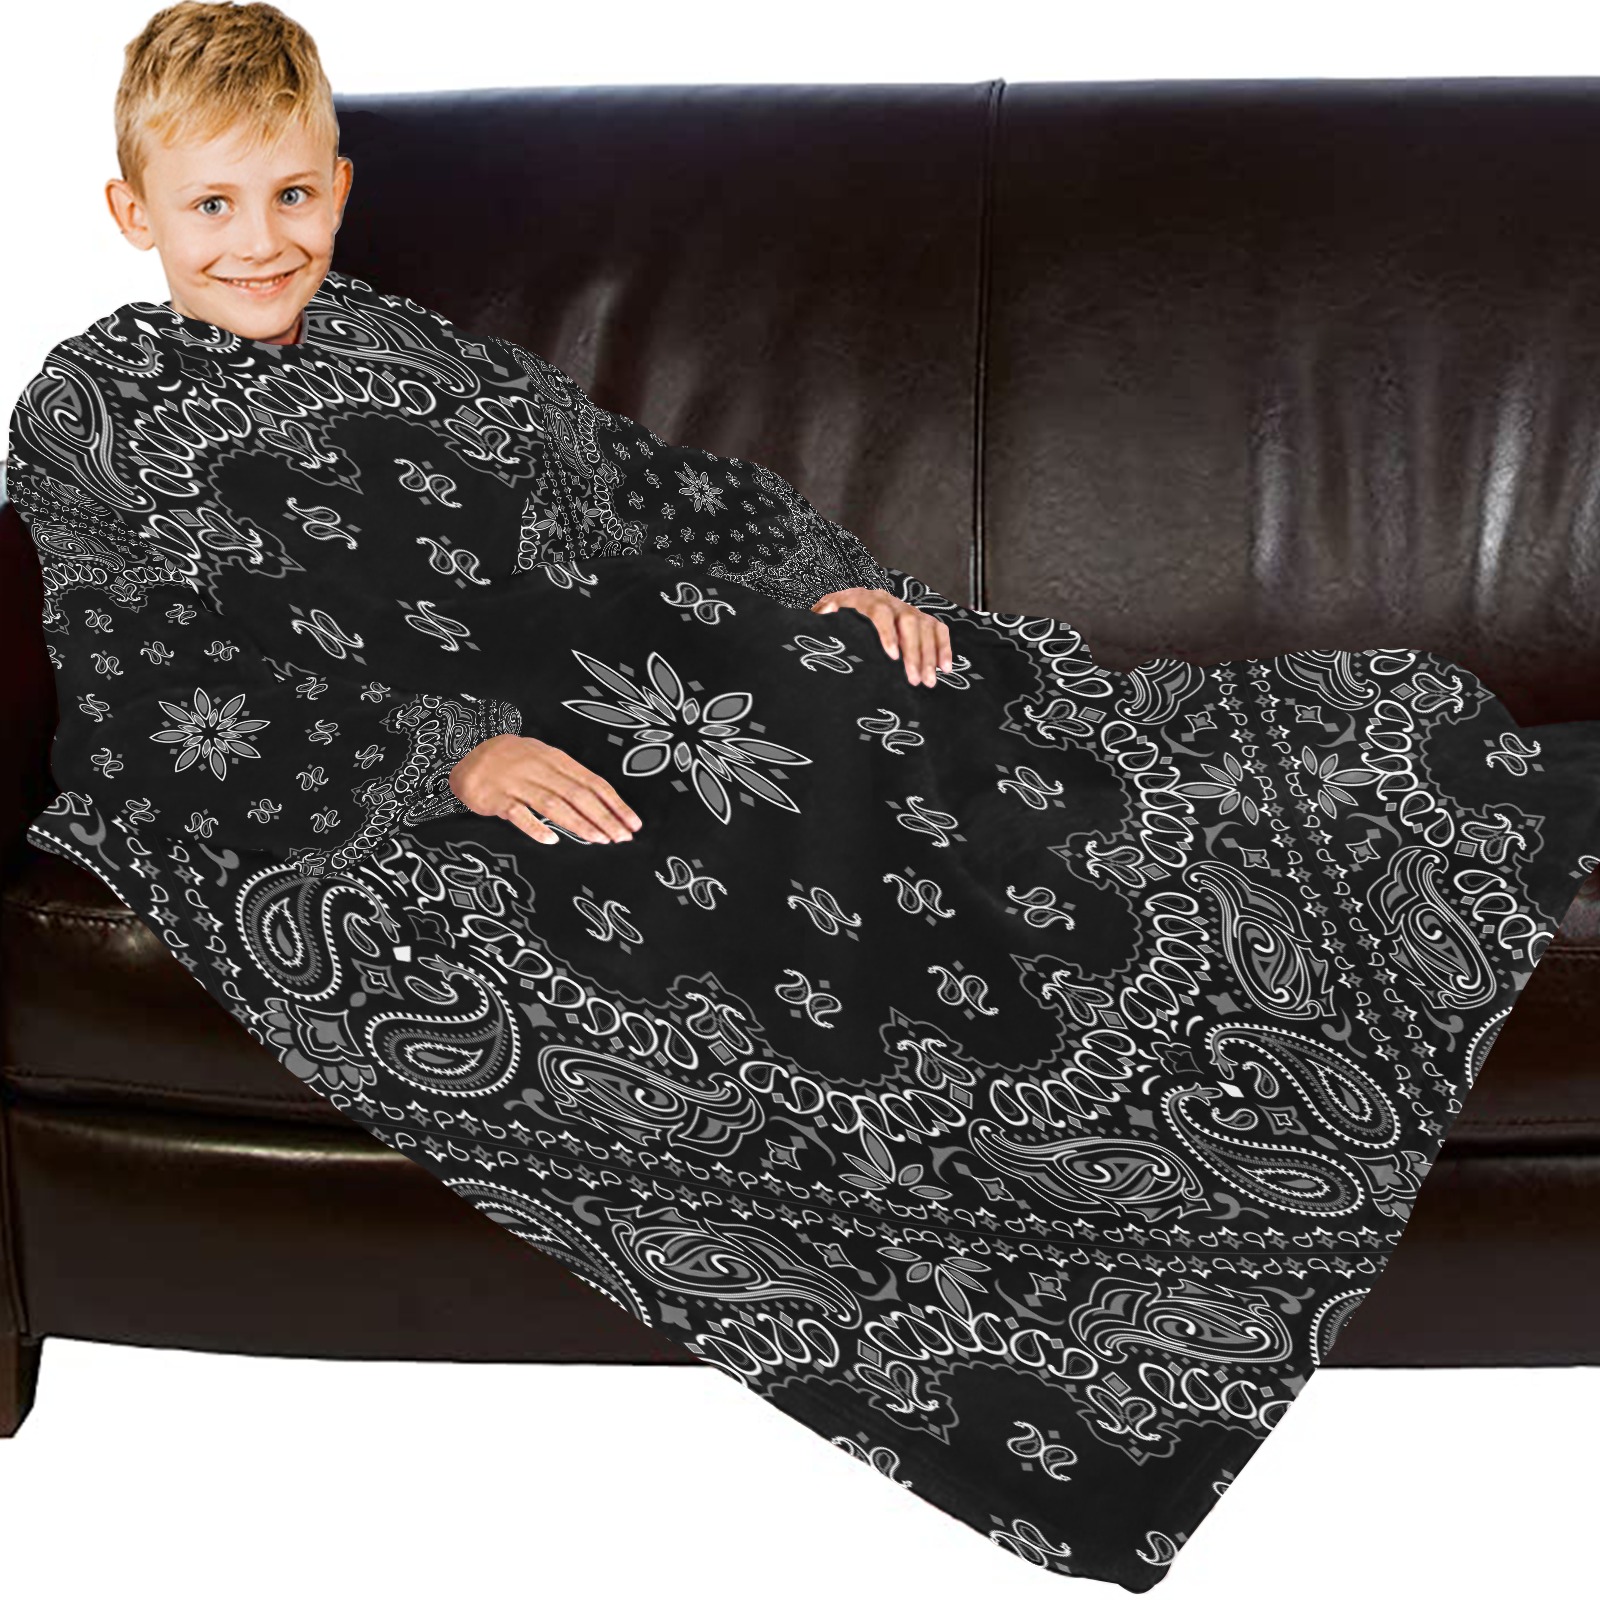 Black Bandanna Pattern Blanket Robe with Sleeves for Kids